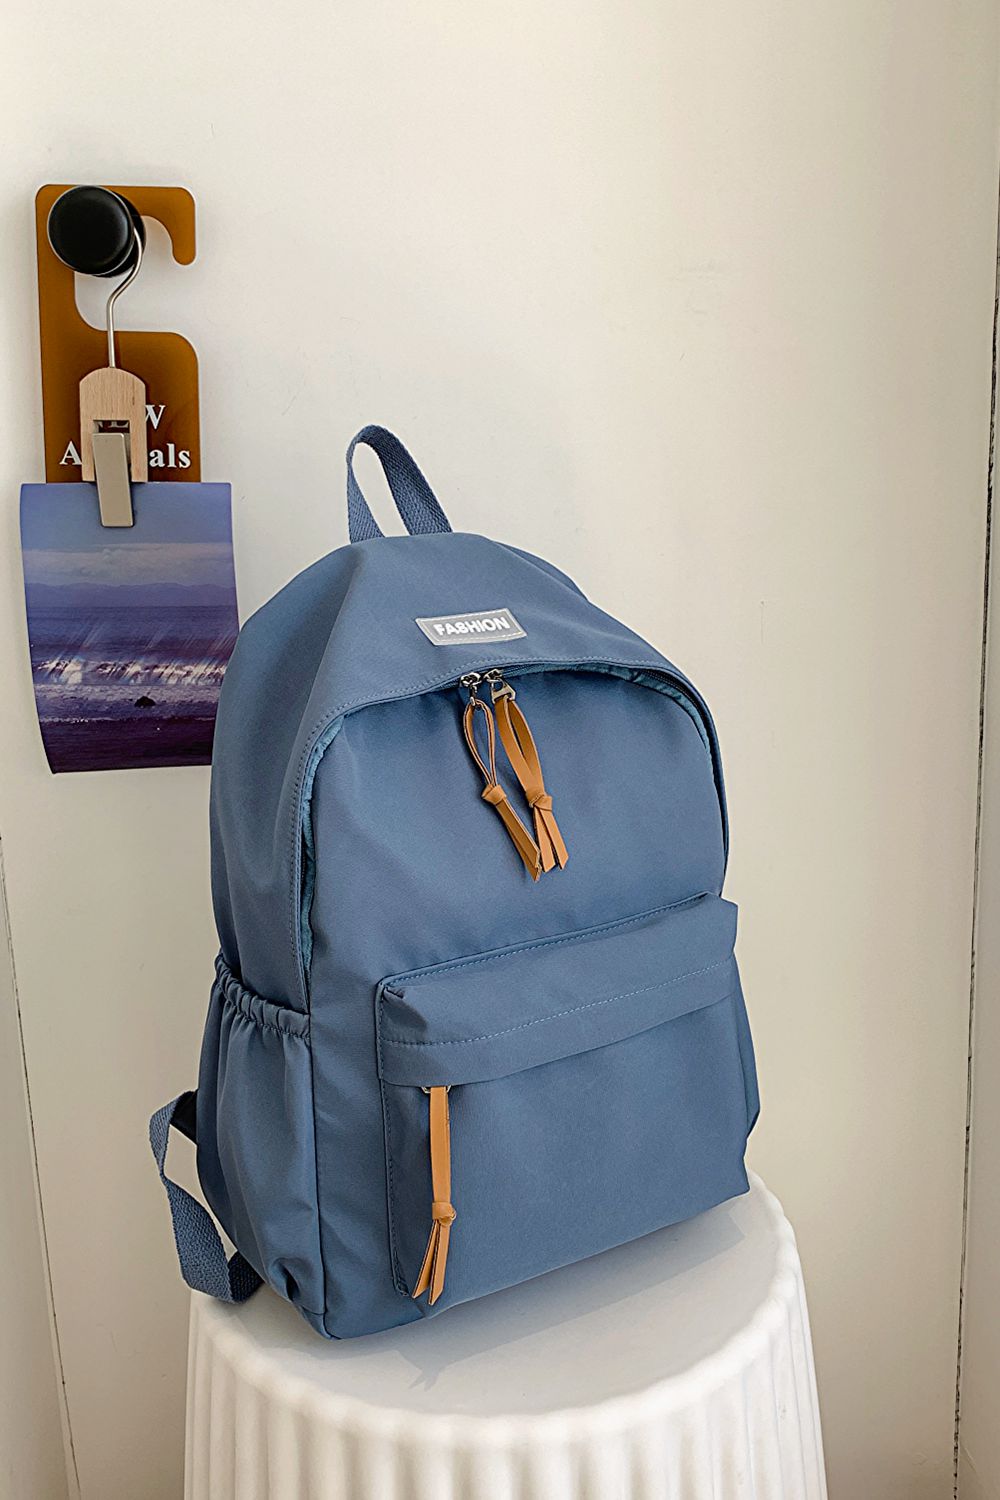 Gray FASHION Polyester Backpack